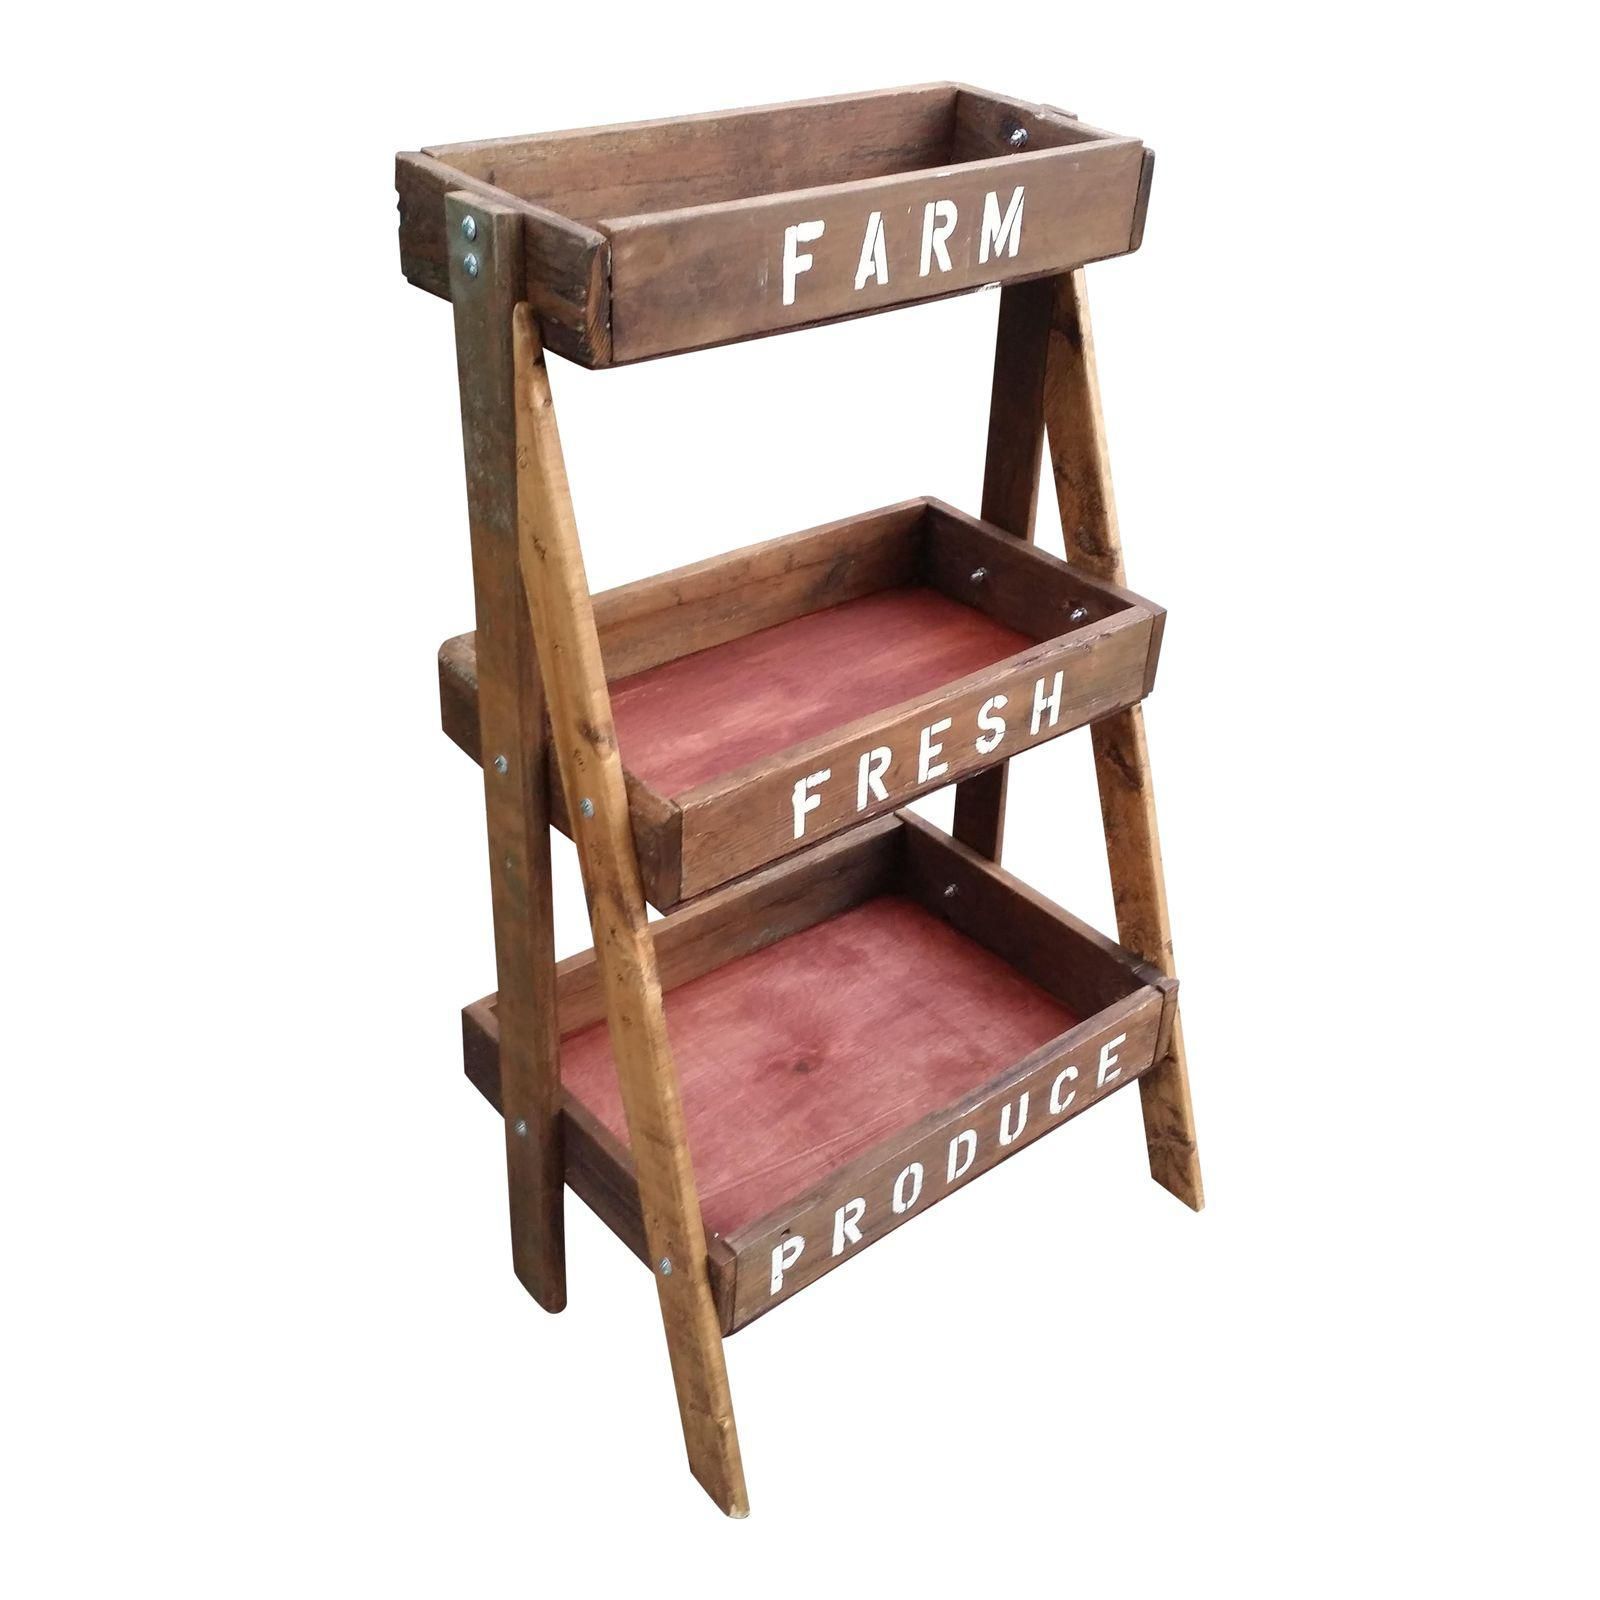 Farm Stand Shelf – 3 Tiers – Image 1 Of 5 | Farm Stand Ideas, Farm With Farmhouse Stands With Shelves (Gallery 14 of 20)